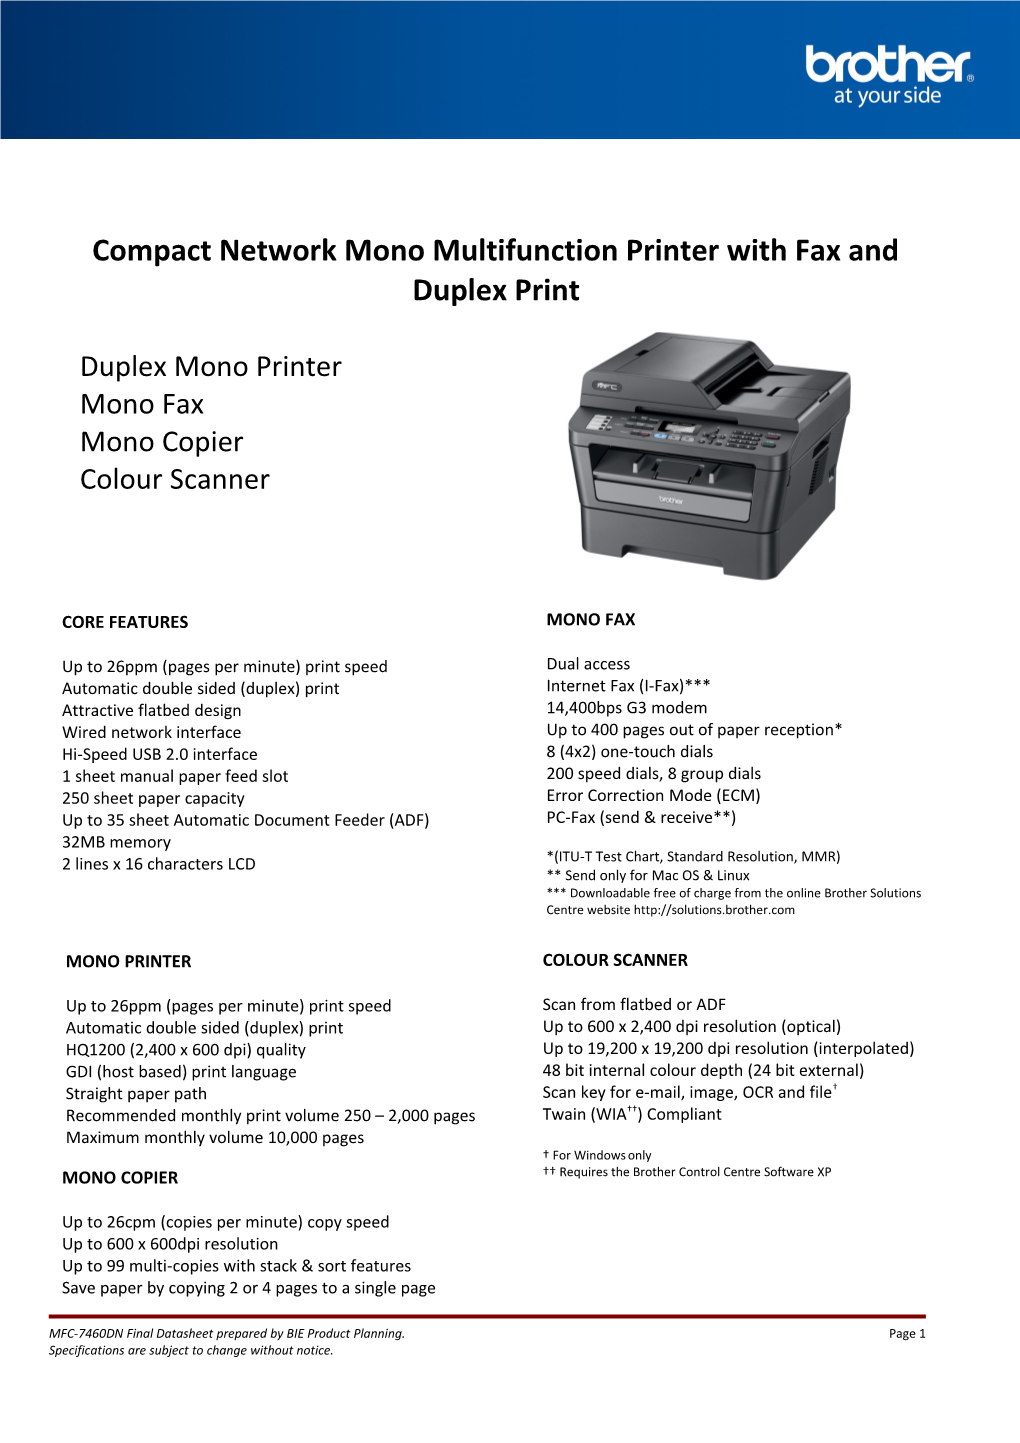 Compact Network Mono Multifunction Printer with Fax and Duplex Print